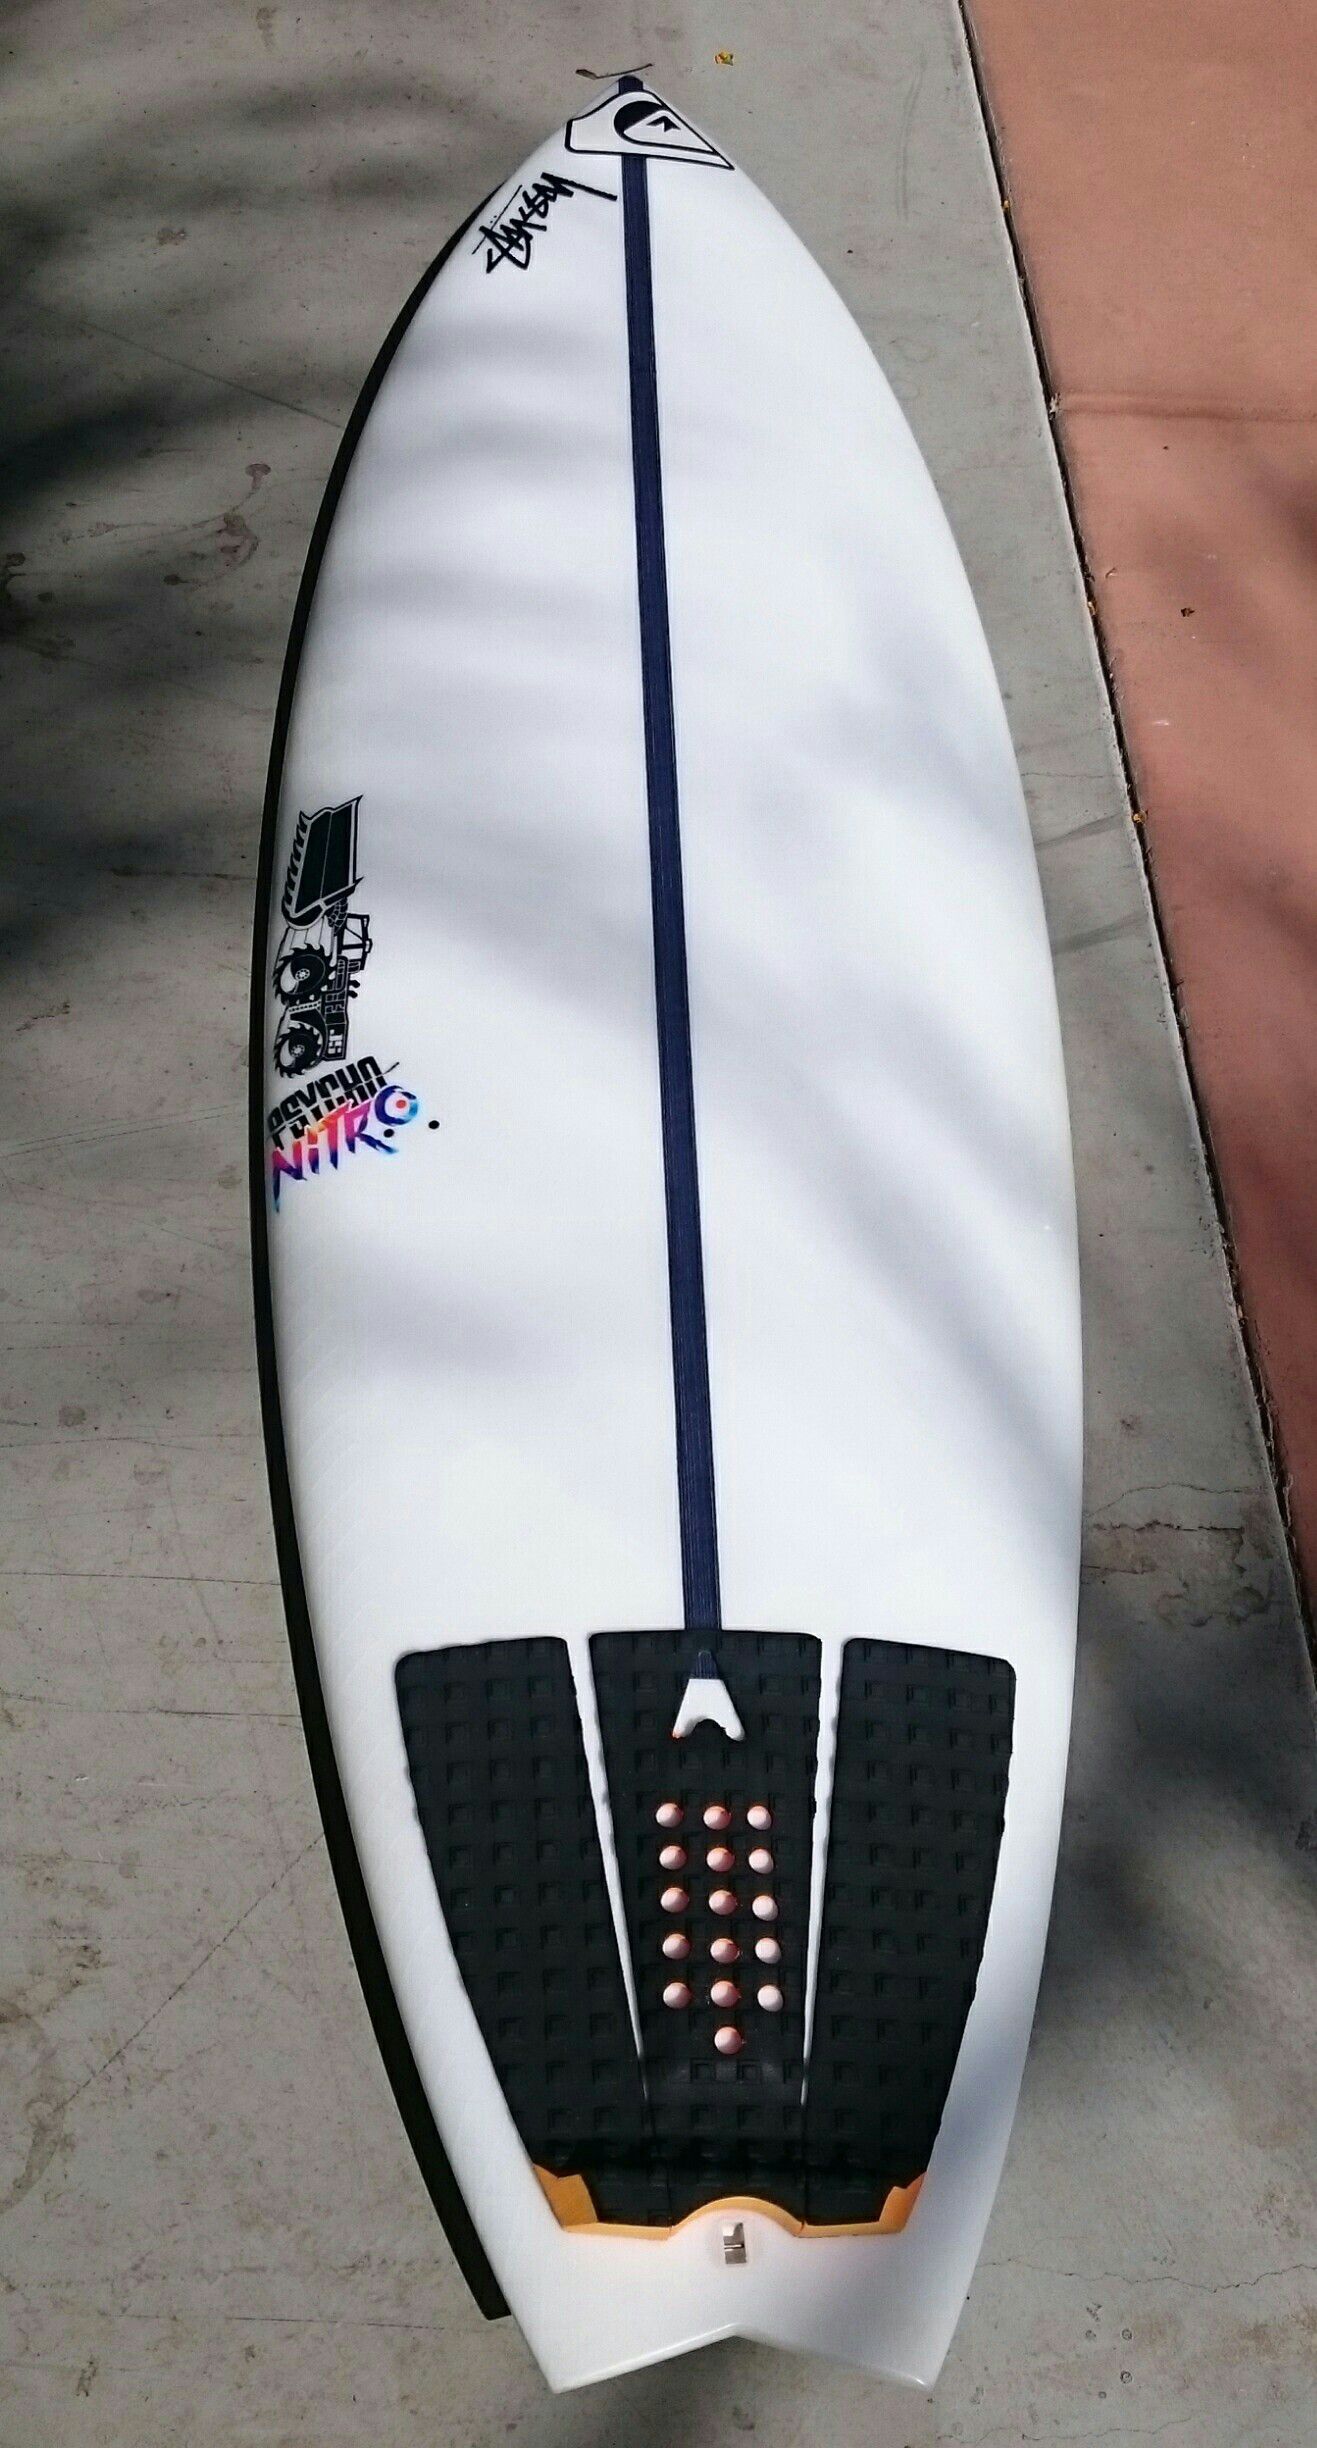 JS Industries Surfboard Excellent condition Psycho Nitro 5'8